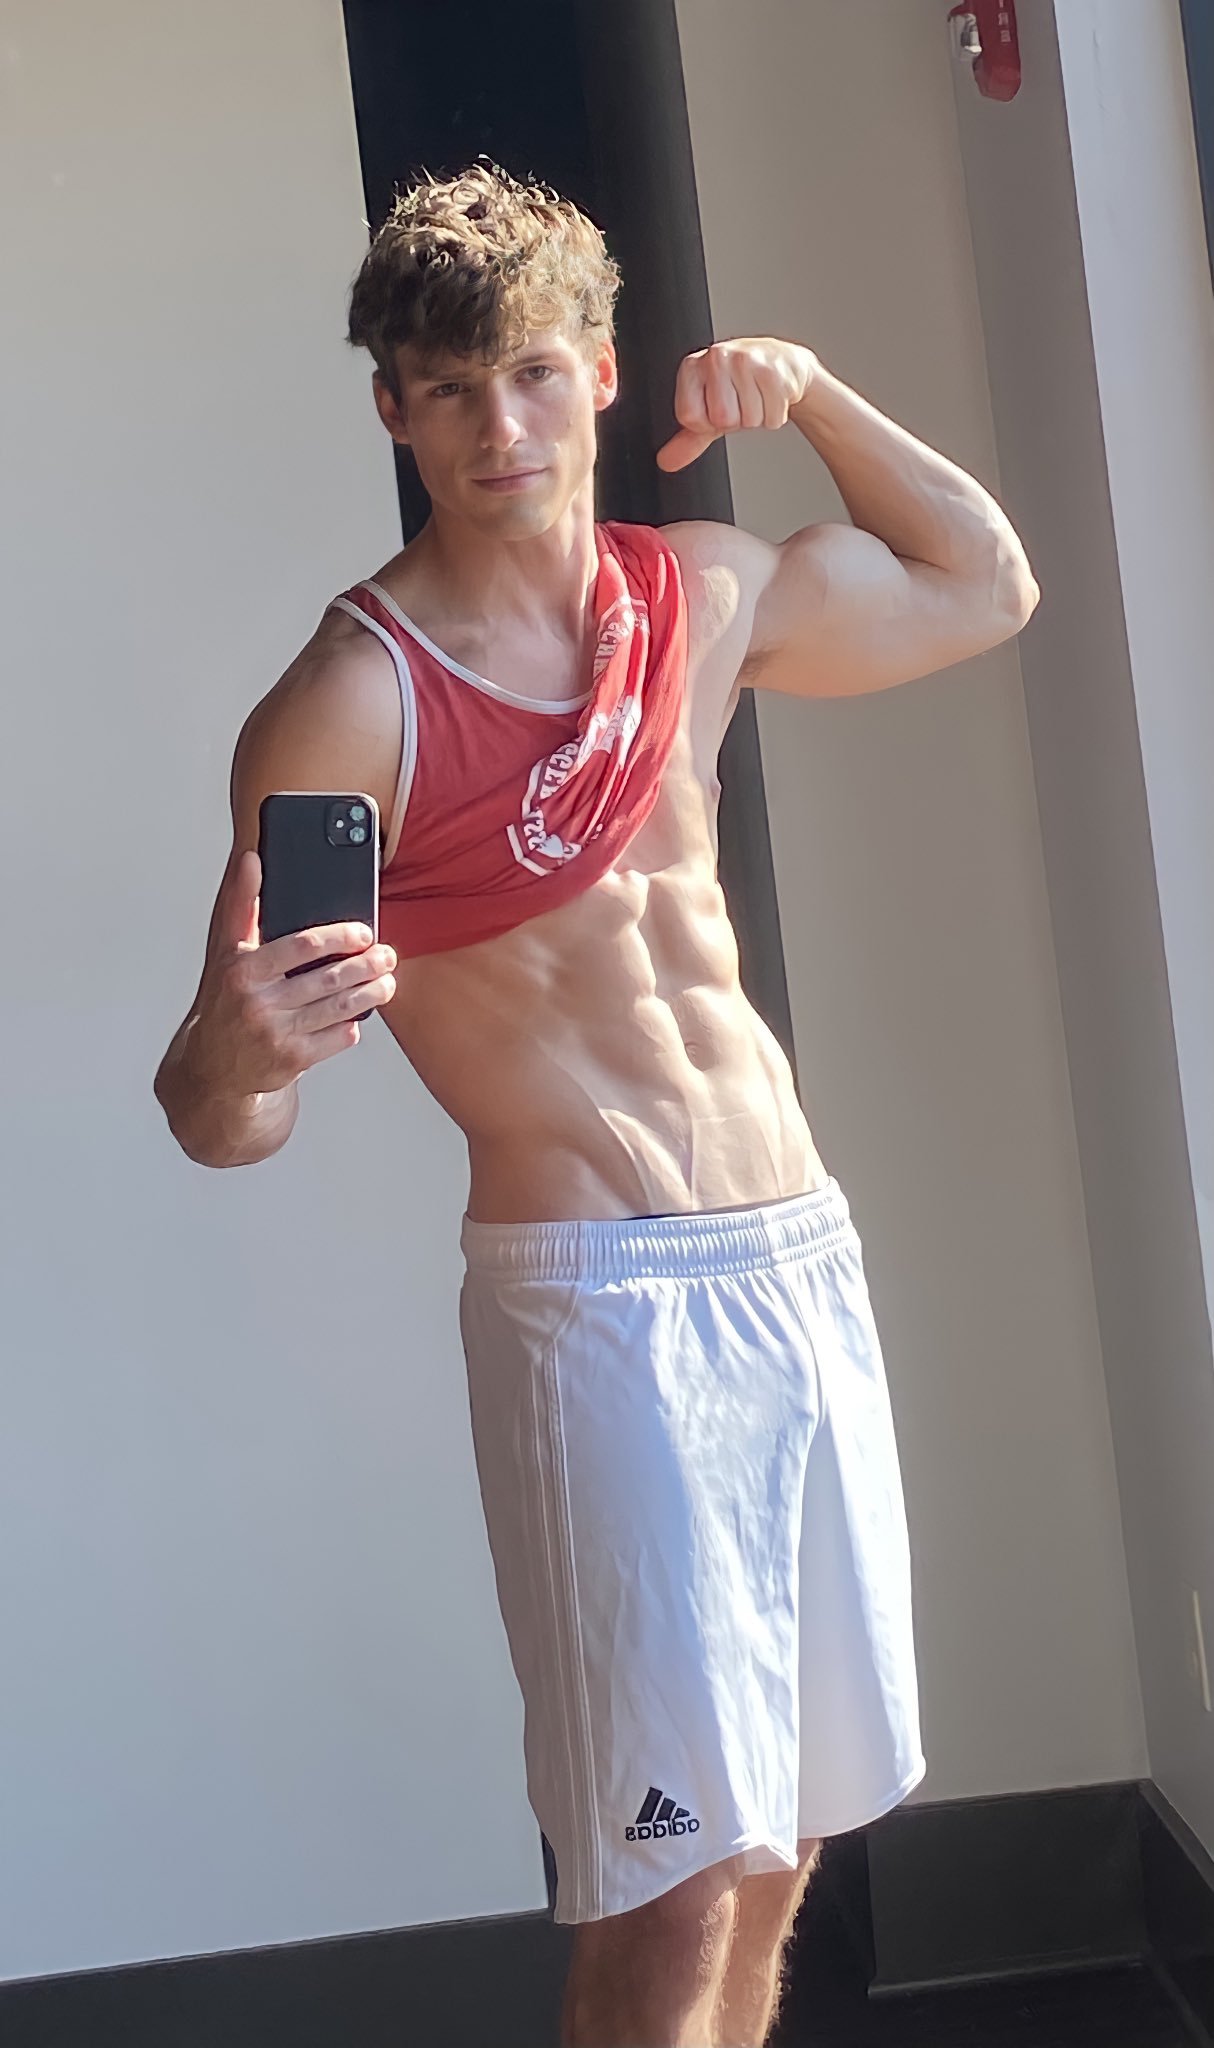 young-fit-hot-guy-daily-male-sexiness-overload-abs-biceps-flex-selfie